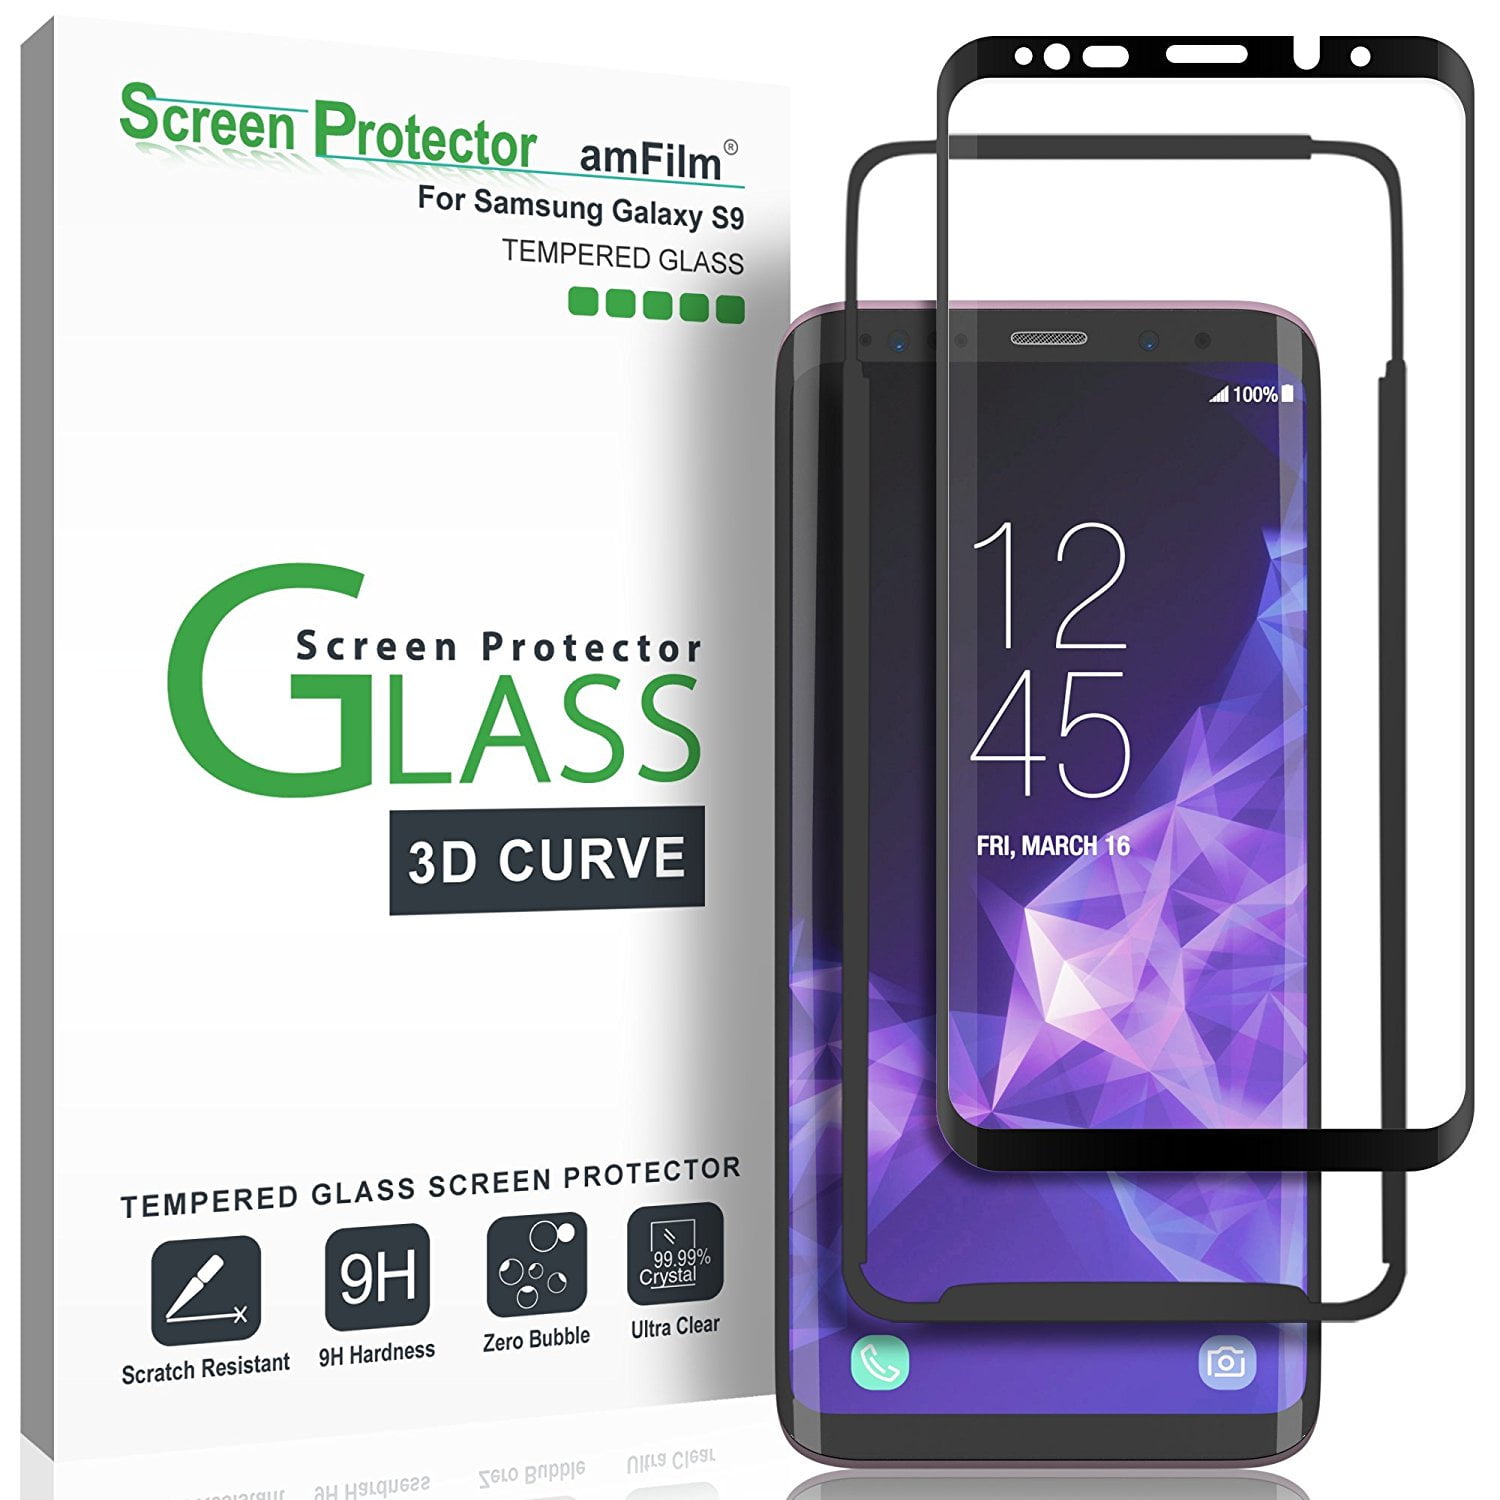 Galaxy J7 2016 Tempered Glass Screen Protector Bear Village Ultra Clear Screen Protector 1 Pack Anti Scratch Screen Protector Glass for Samsung Galaxy J7 2016 